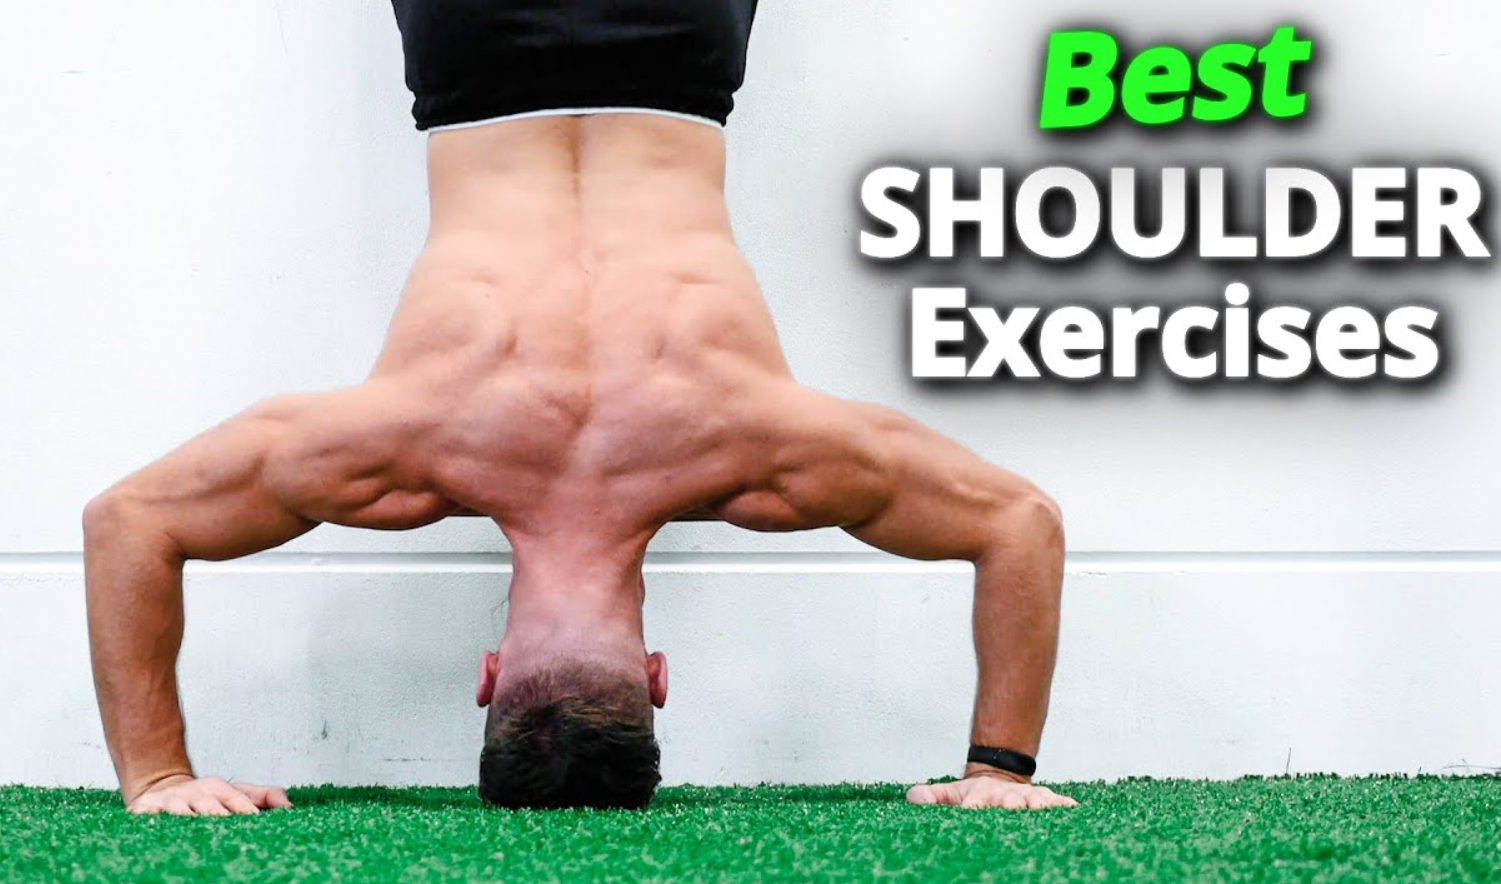 The Top Bodyweight Shoulder Exercises for Building Strength